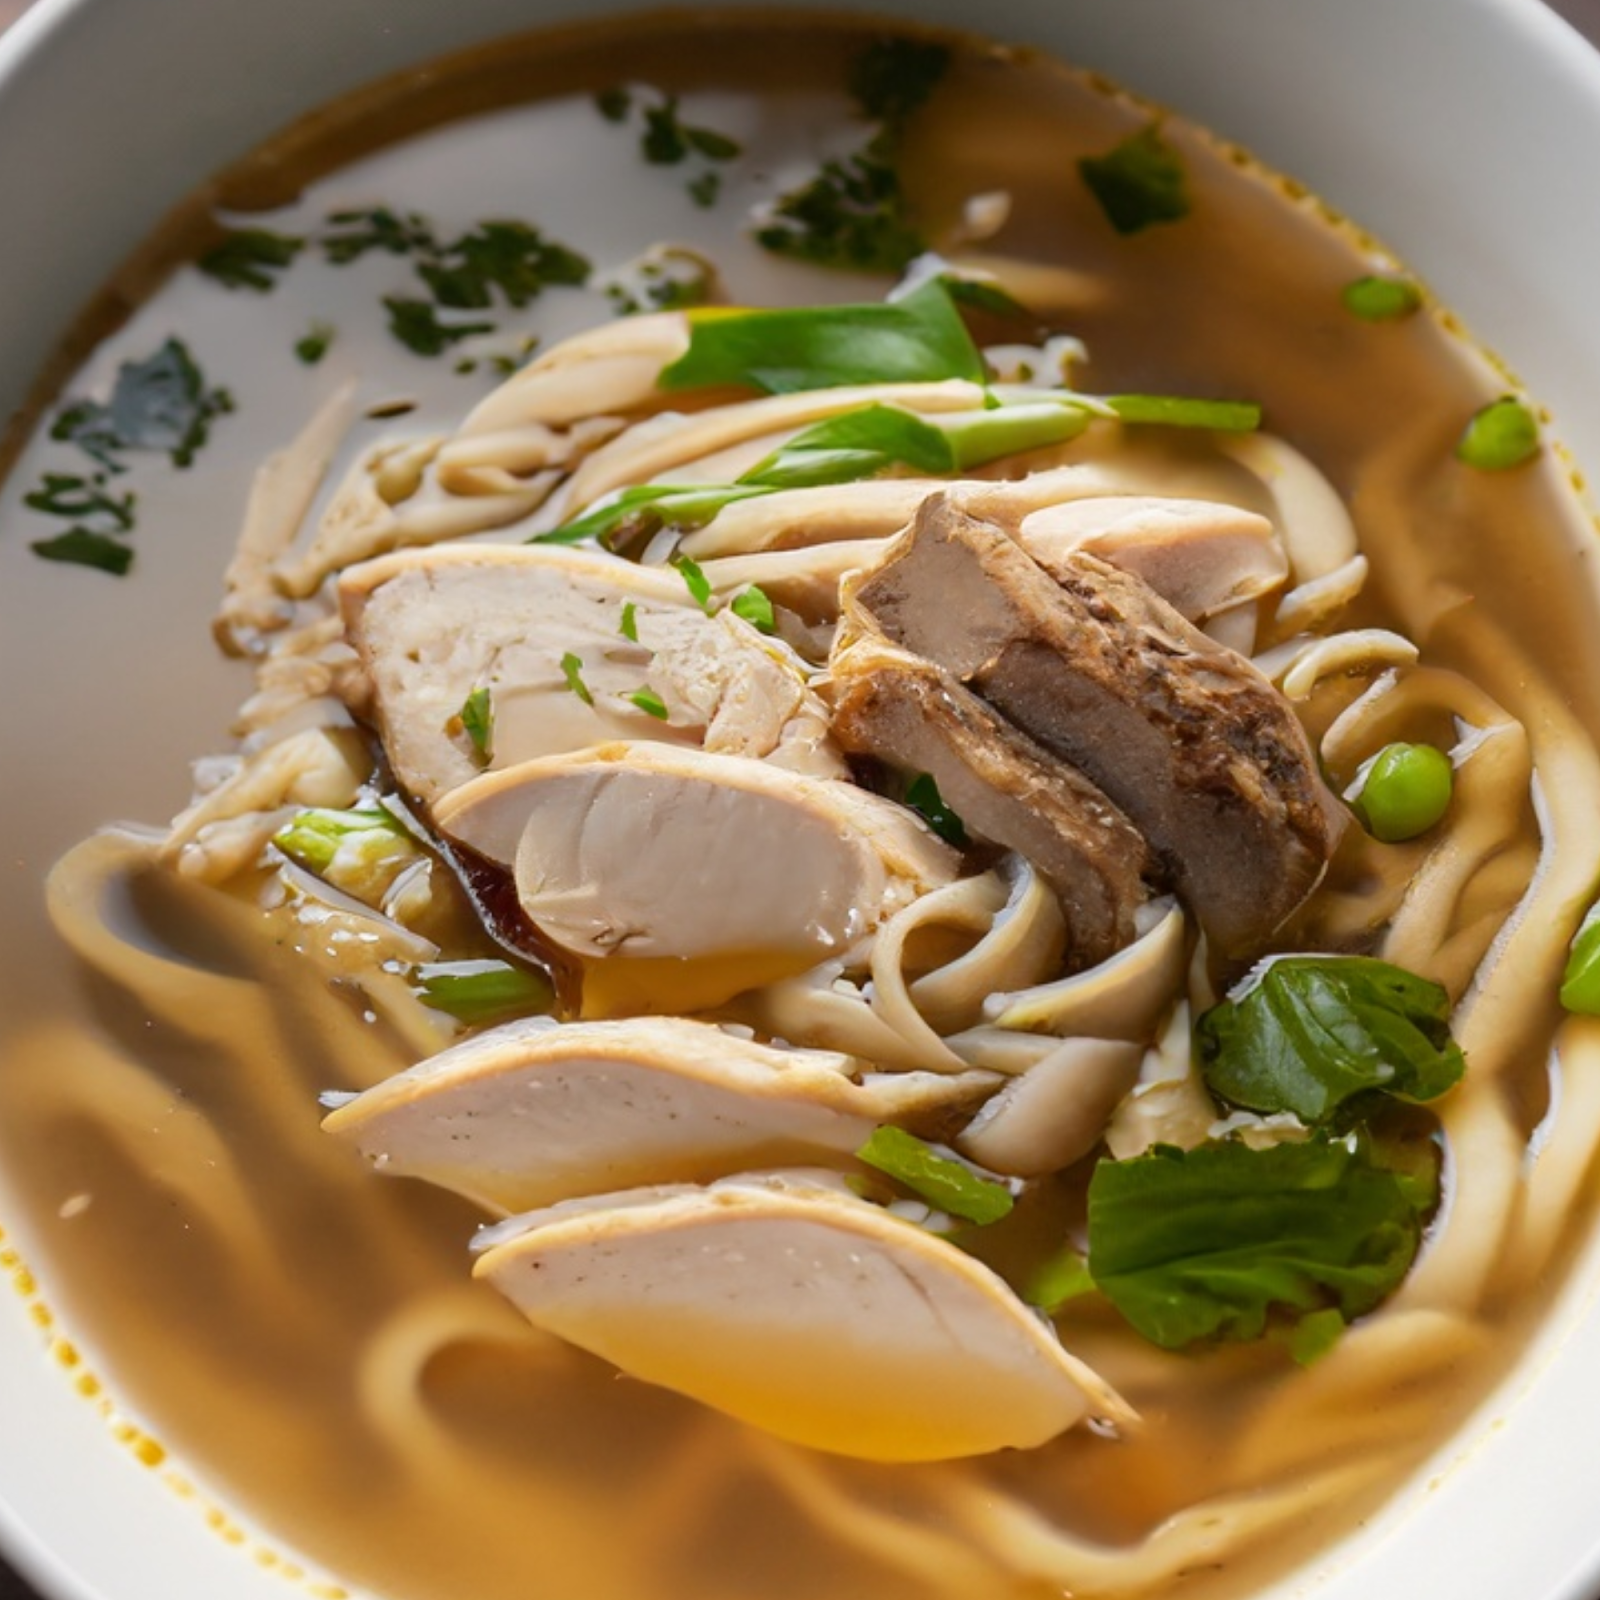 Chicken Cabbage And Soba Soup